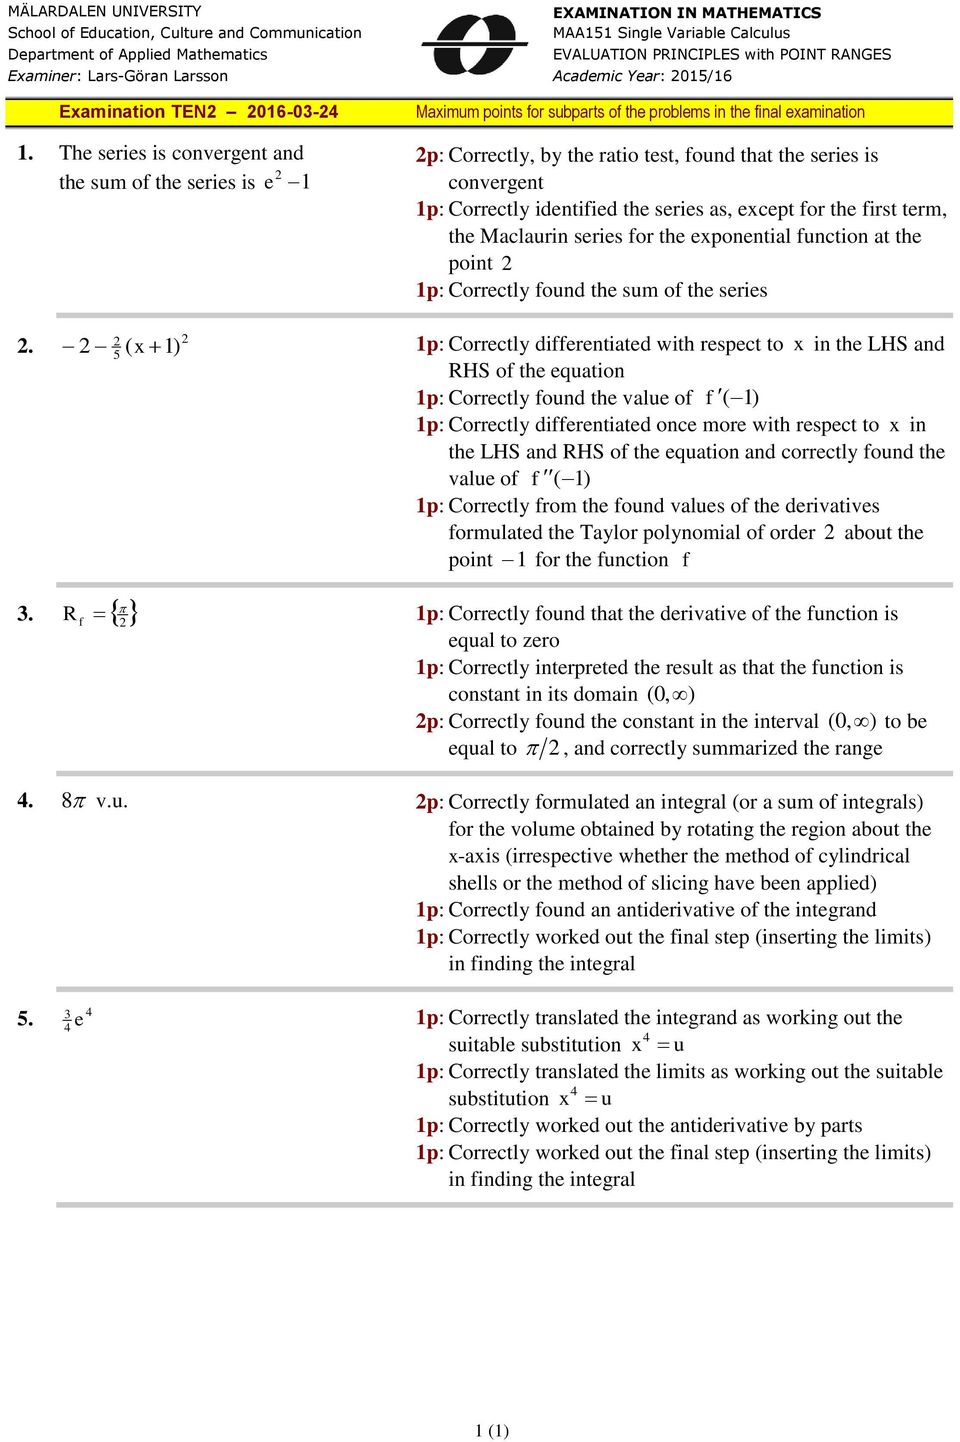 for subparts of the problems in the final examination 2p: Correctly, by the ratio test, found that the series is convergent 1p: Correctly identified the series as, except for the first term, the